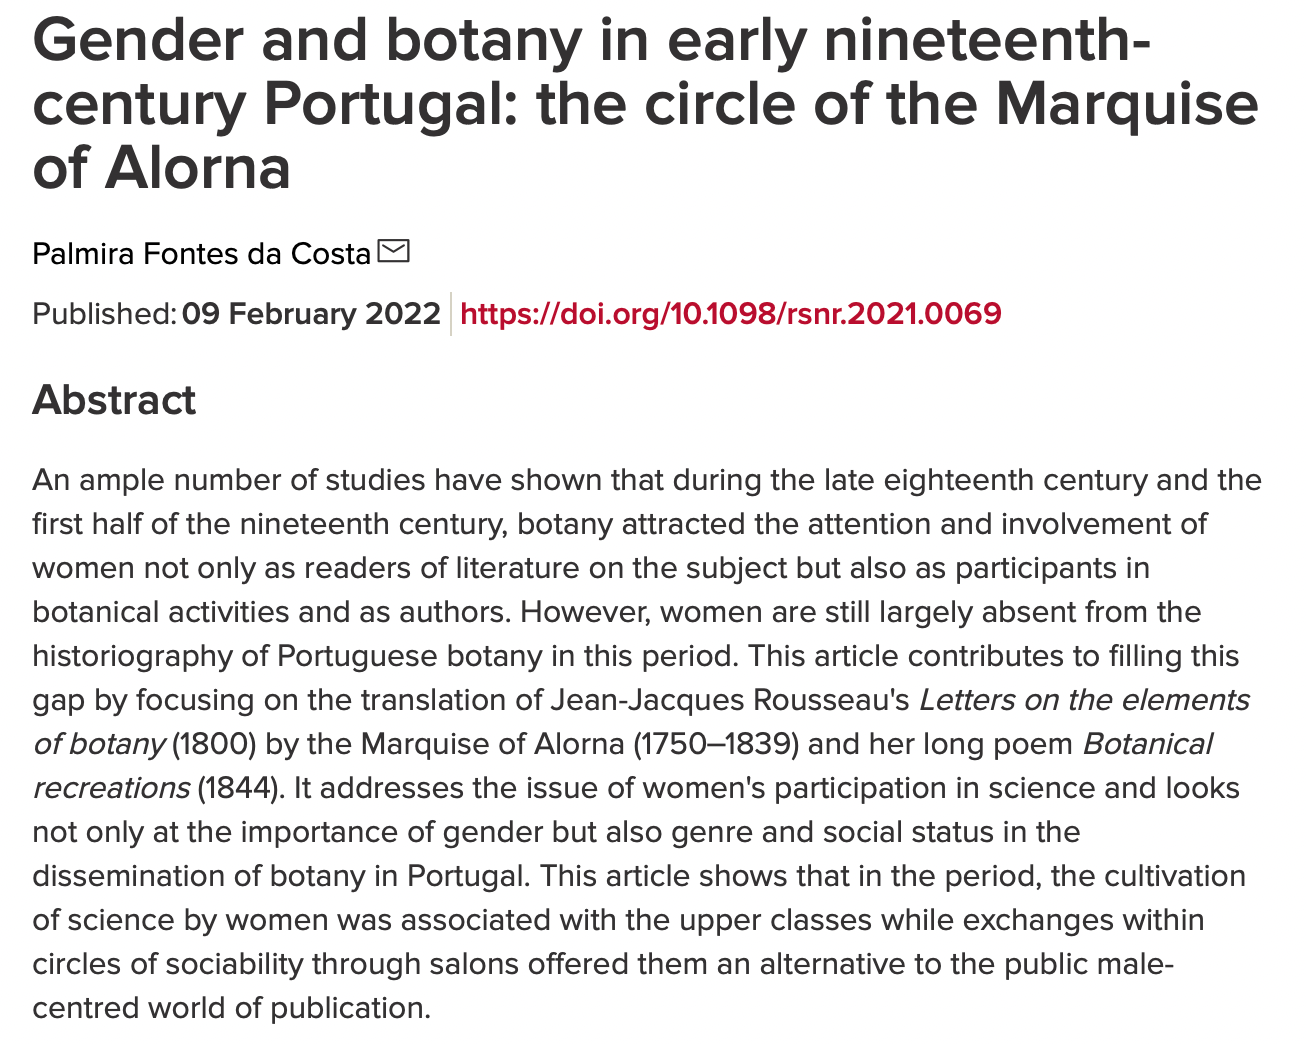 Gender and botany in early nineteenth-century Portugal: the circle of the Marquise of Alorna, Capa